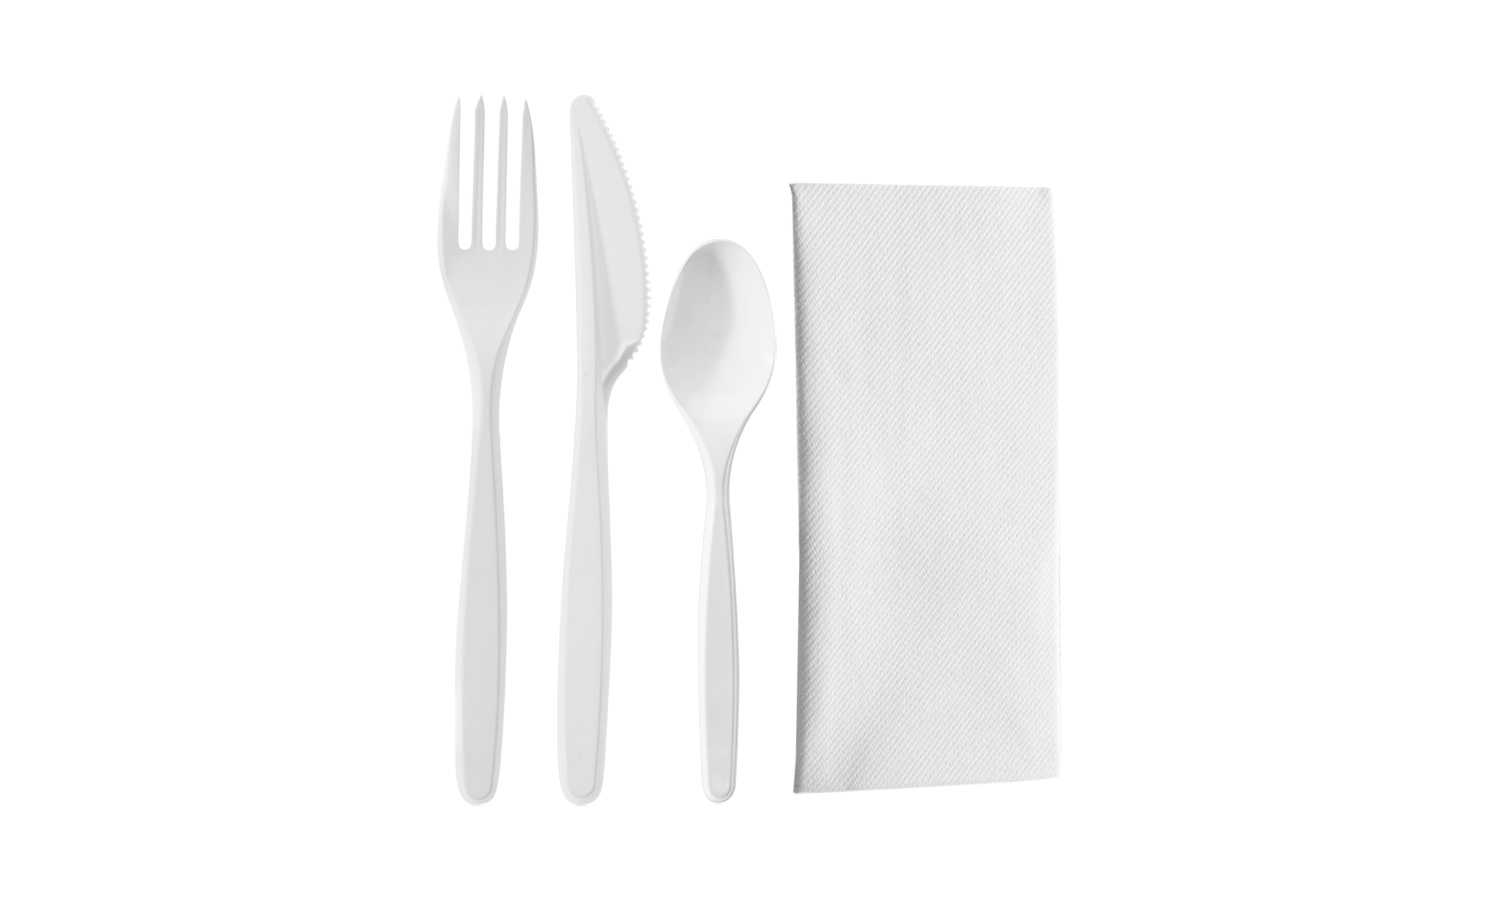 Napkin, Fork, Knife and Spoon